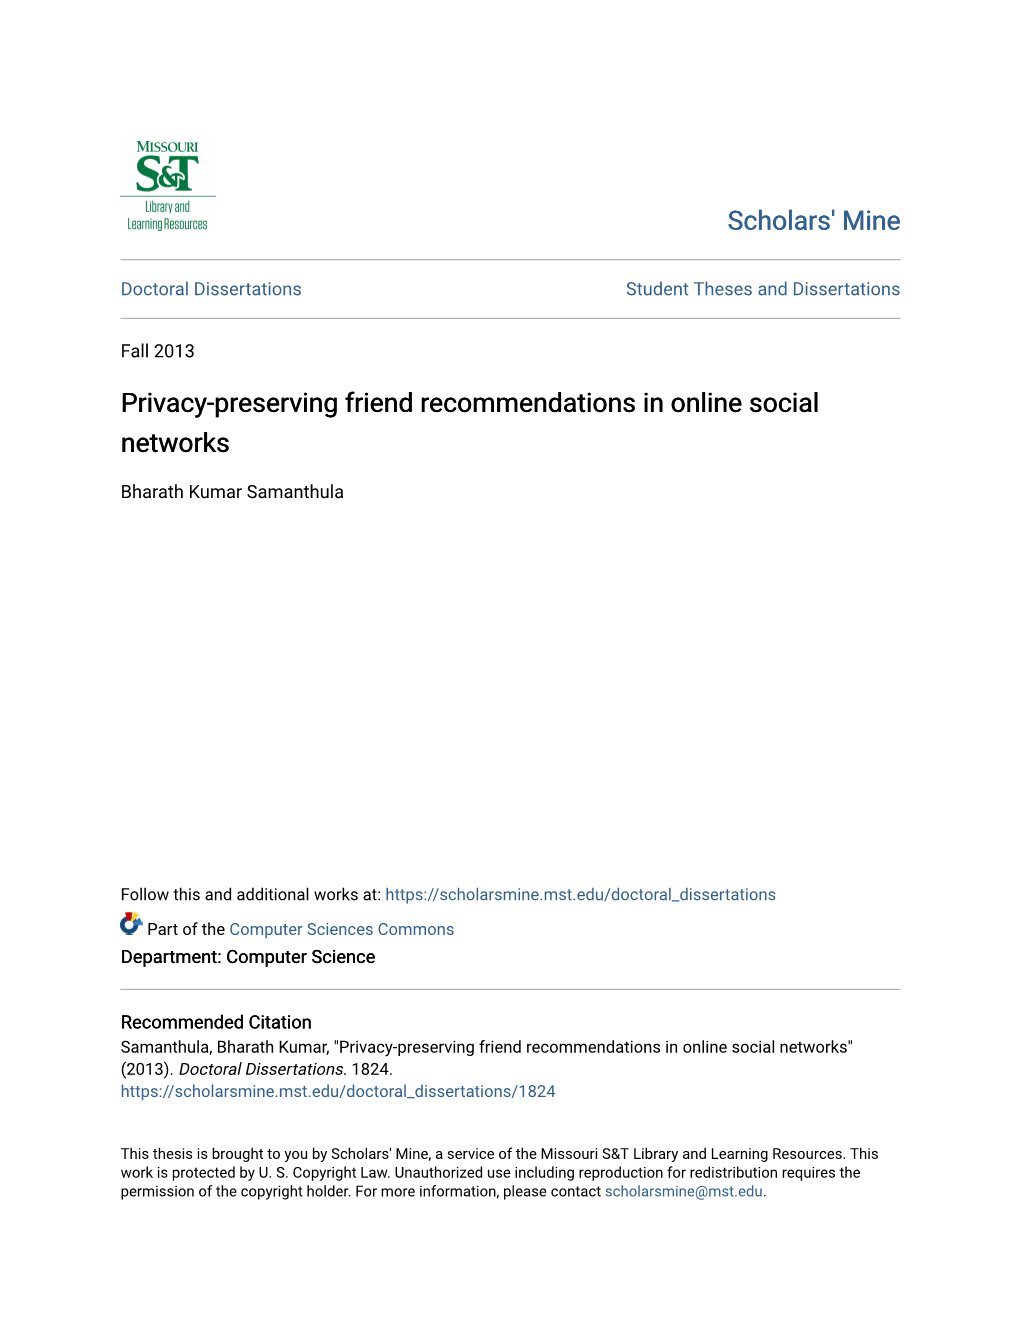 Privacy-Preserving Friend Recommendations in Online Social Networks